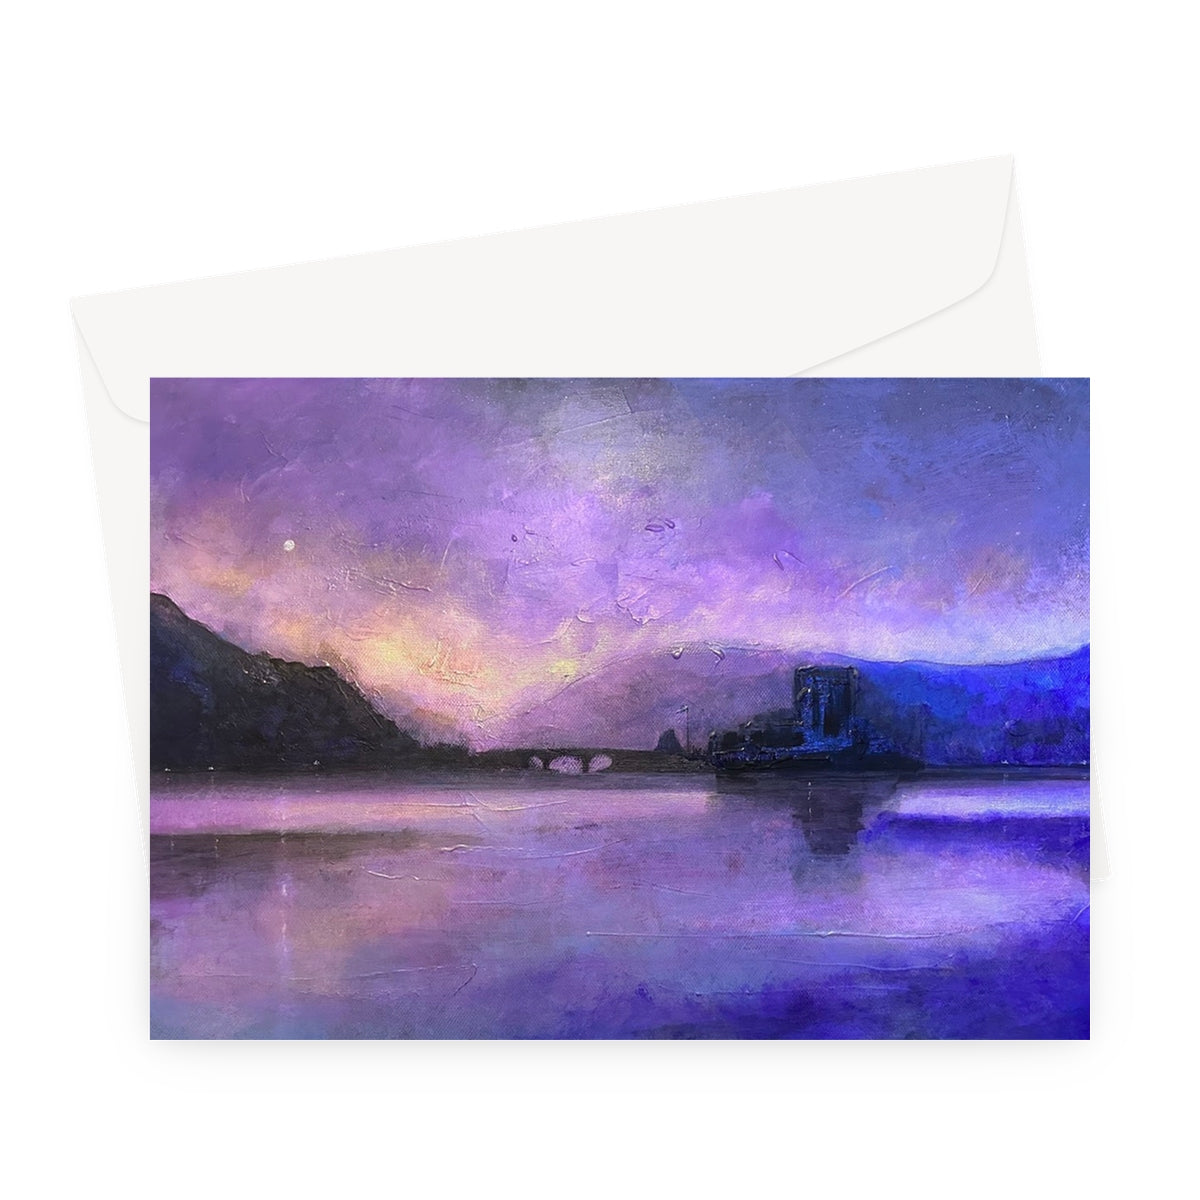 Eilean Donan Castle Moonset Art Gifts Greeting Card-Greetings Cards-Historic & Iconic Scotland Art Gallery-A5 Landscape-10 Cards-Paintings, Prints, Homeware, Art Gifts From Scotland By Scottish Artist Kevin Hunter